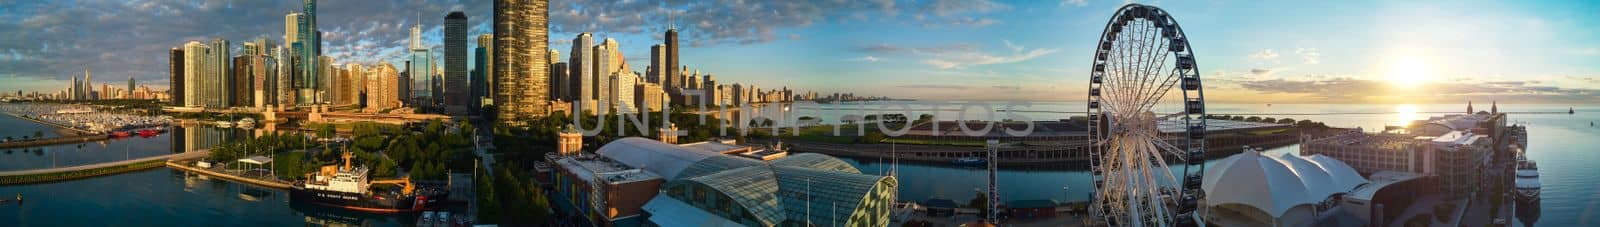 Image of Stunning panorama of Chicago Navy Pier at sunrise with ferris wheel and city skyline